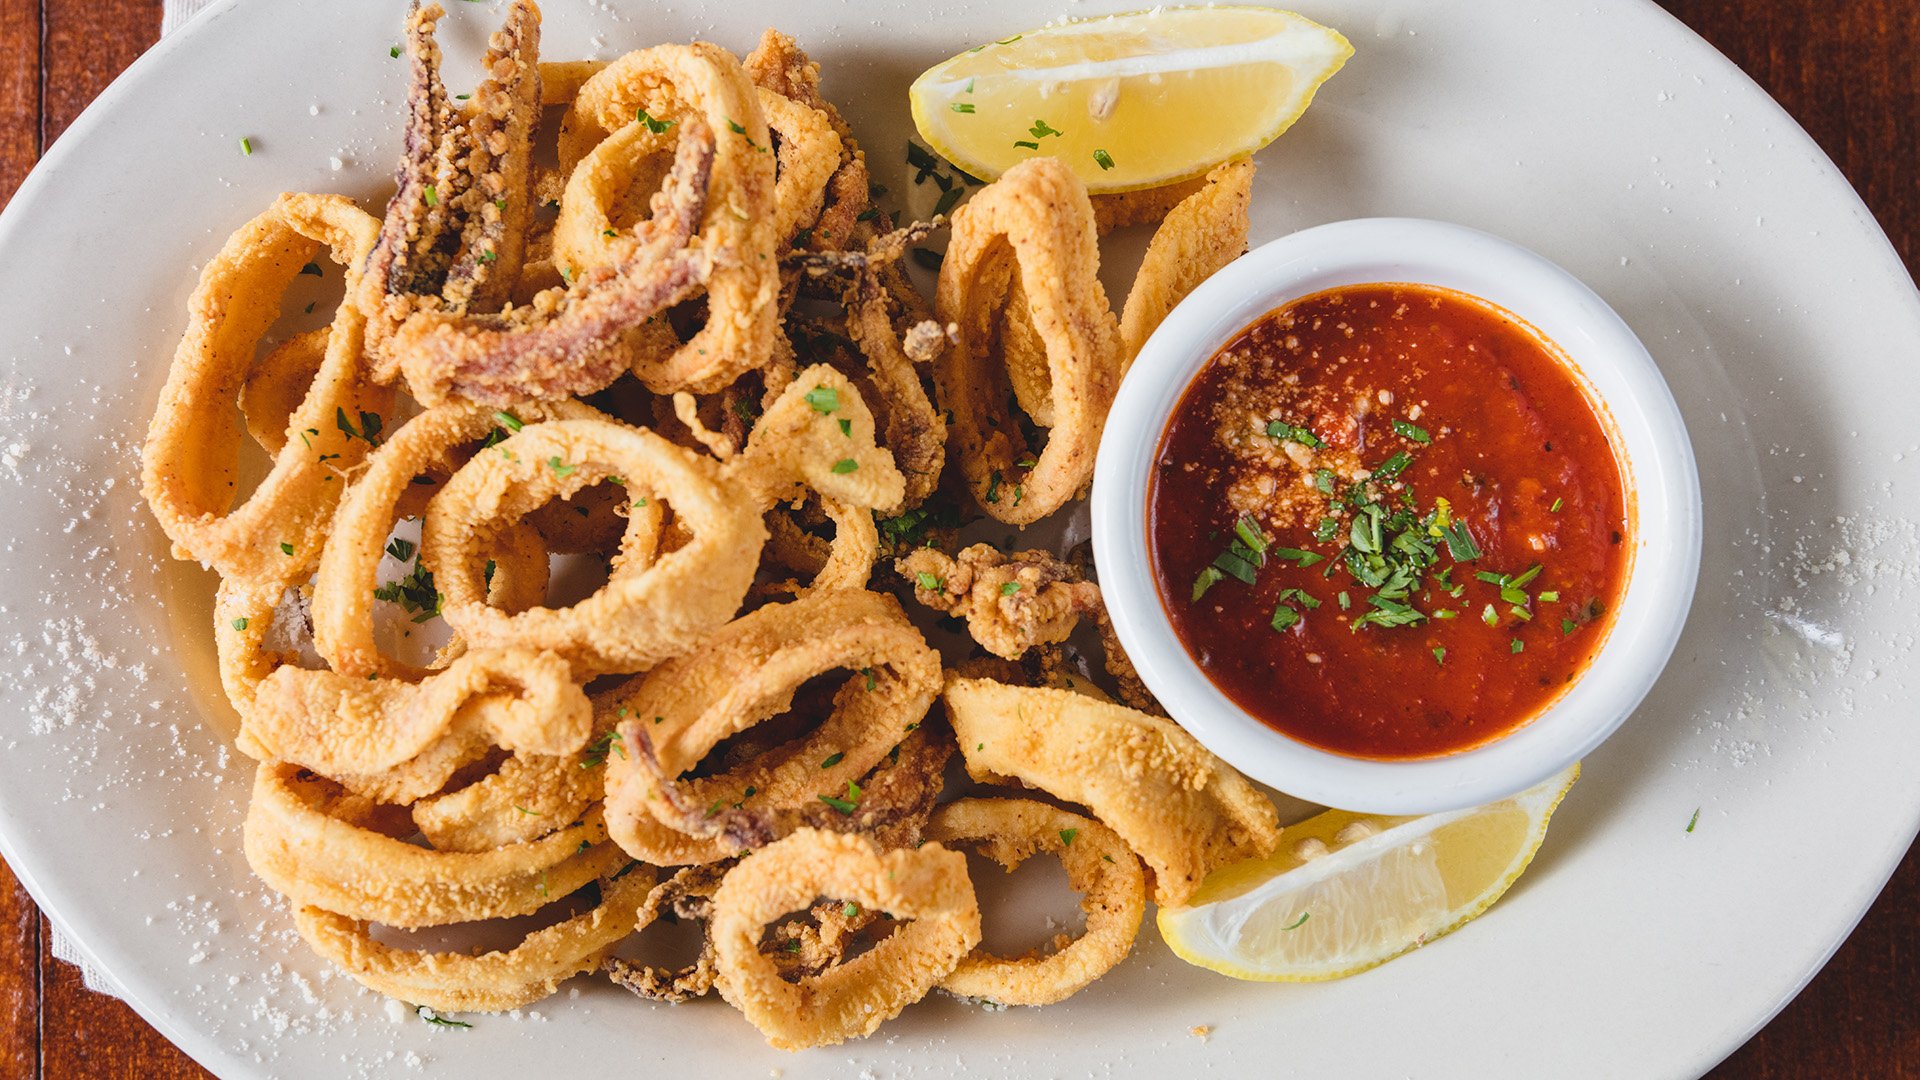 A white plate of fried calamari rings and tentacles, with lemon wedges, a side of marinara, and dusting of parmesan cheese